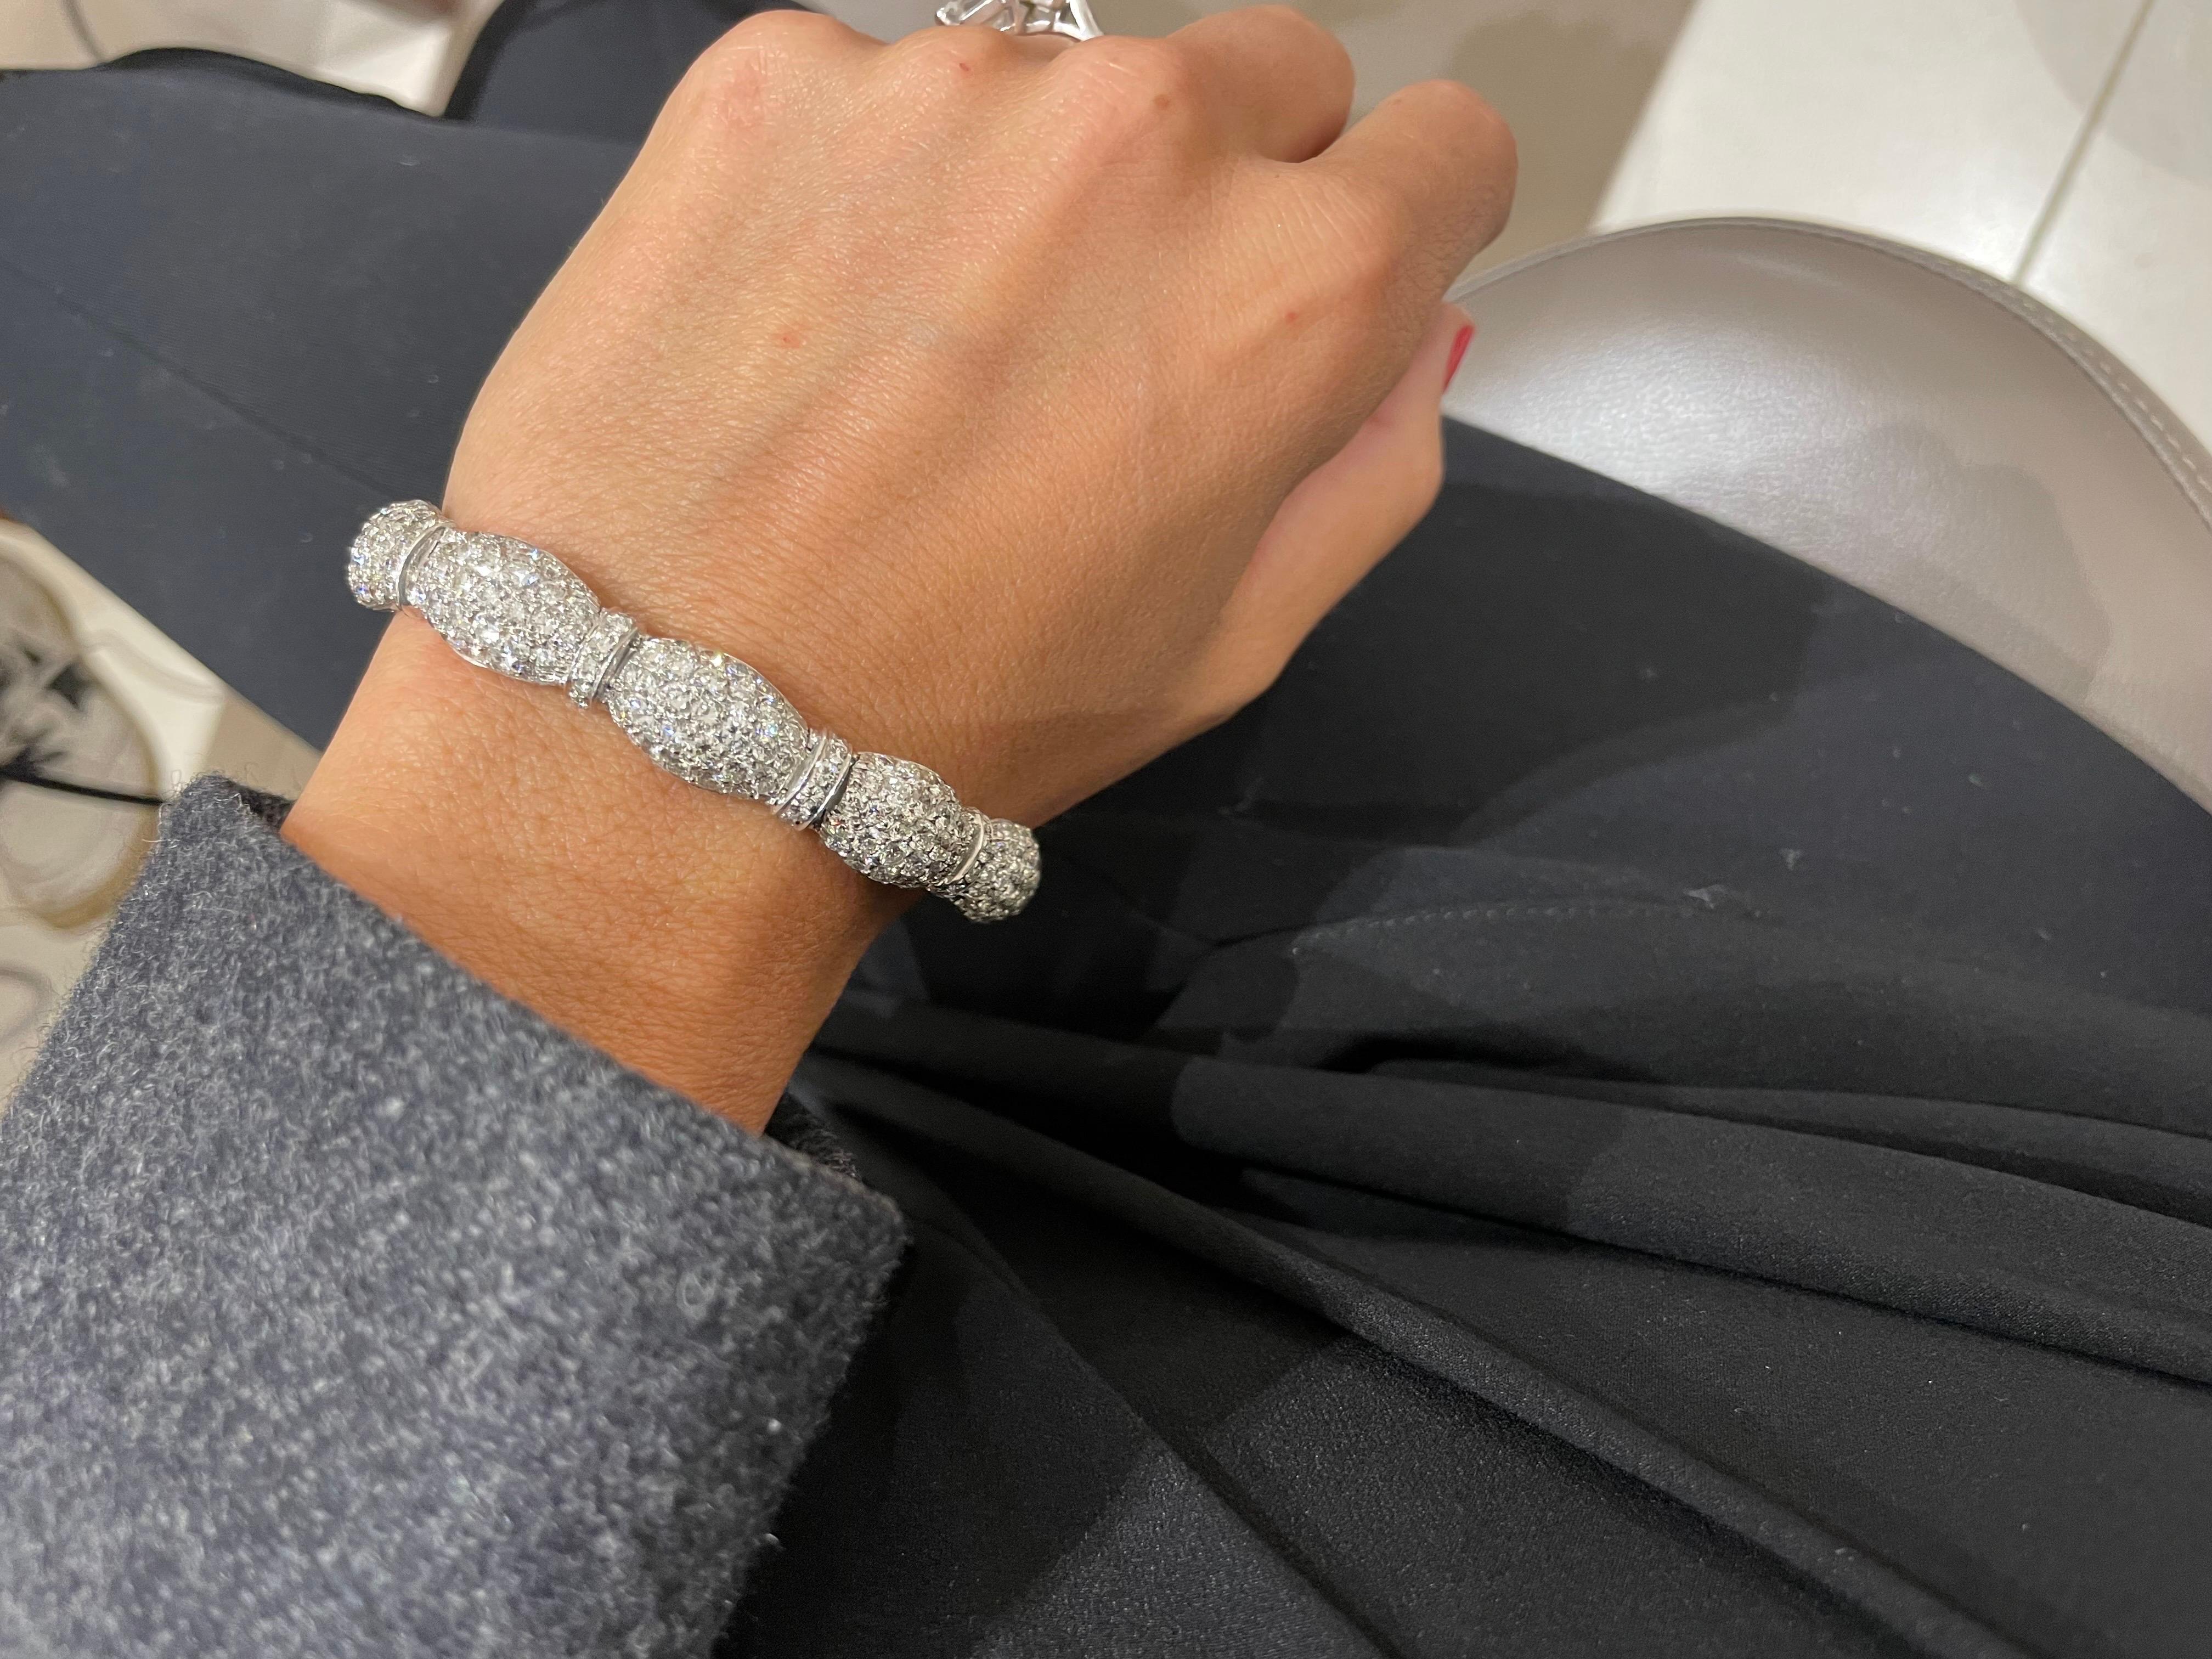 Designed with 10 oval diamond sections, joined with diamond set rondelles, this elegant bracelet remains a classic. The 18 karat white gold bracelet is set with 15.60 carats of round brilliant diamonds and is 7.5